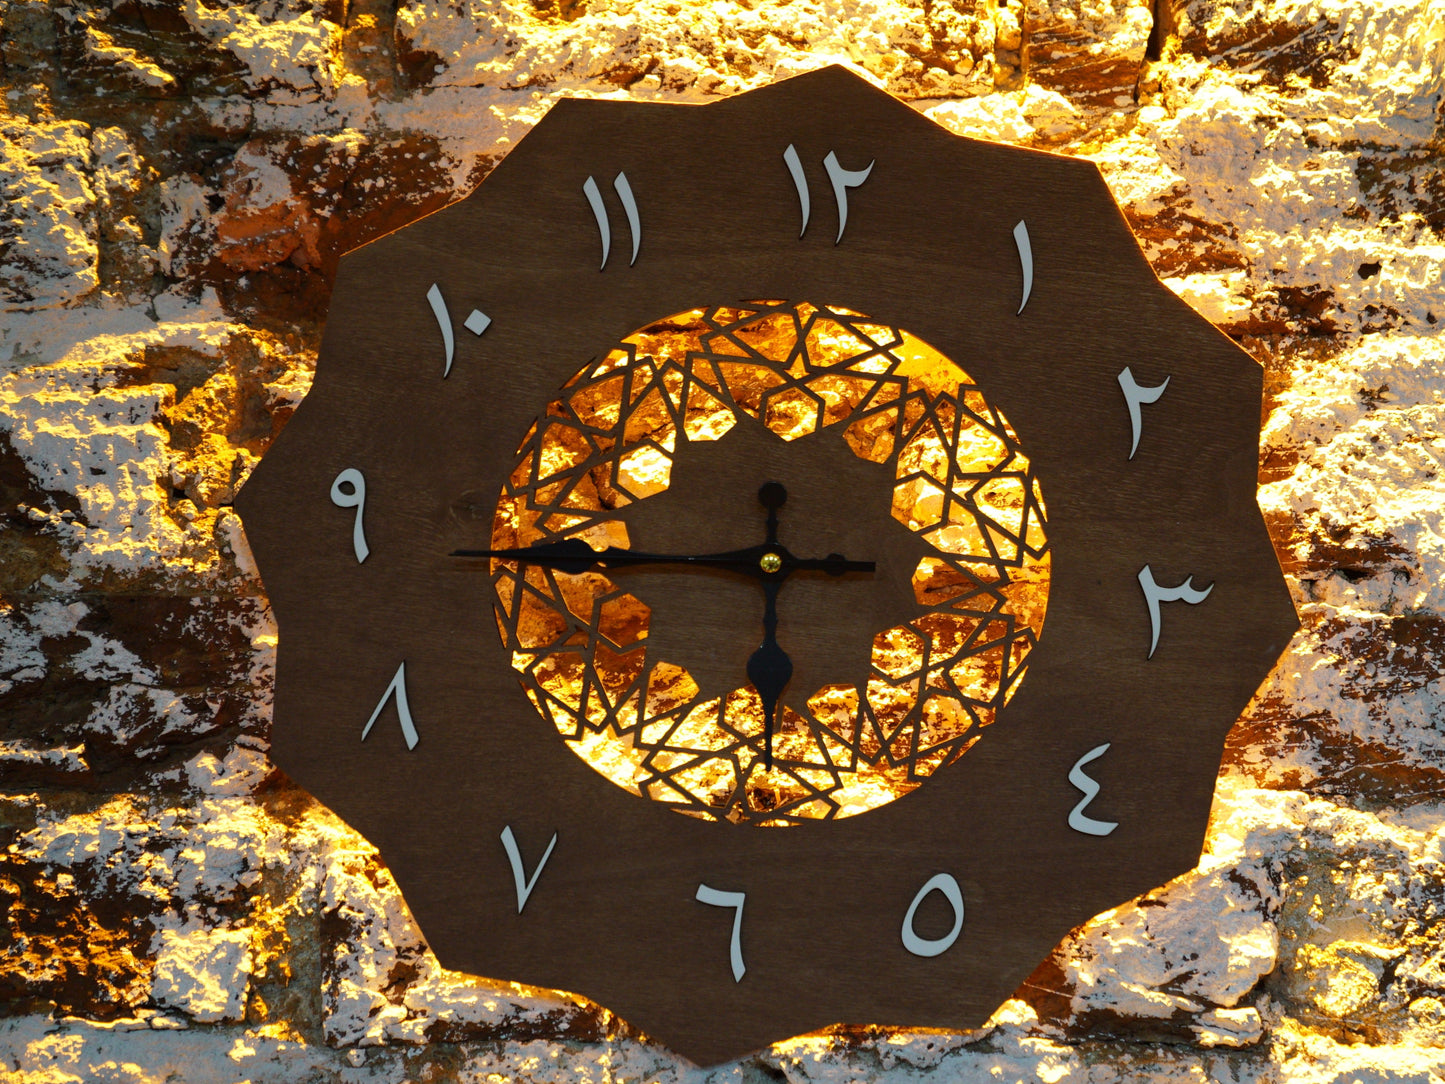 Wooden Wall Clock with Arabic Numerals